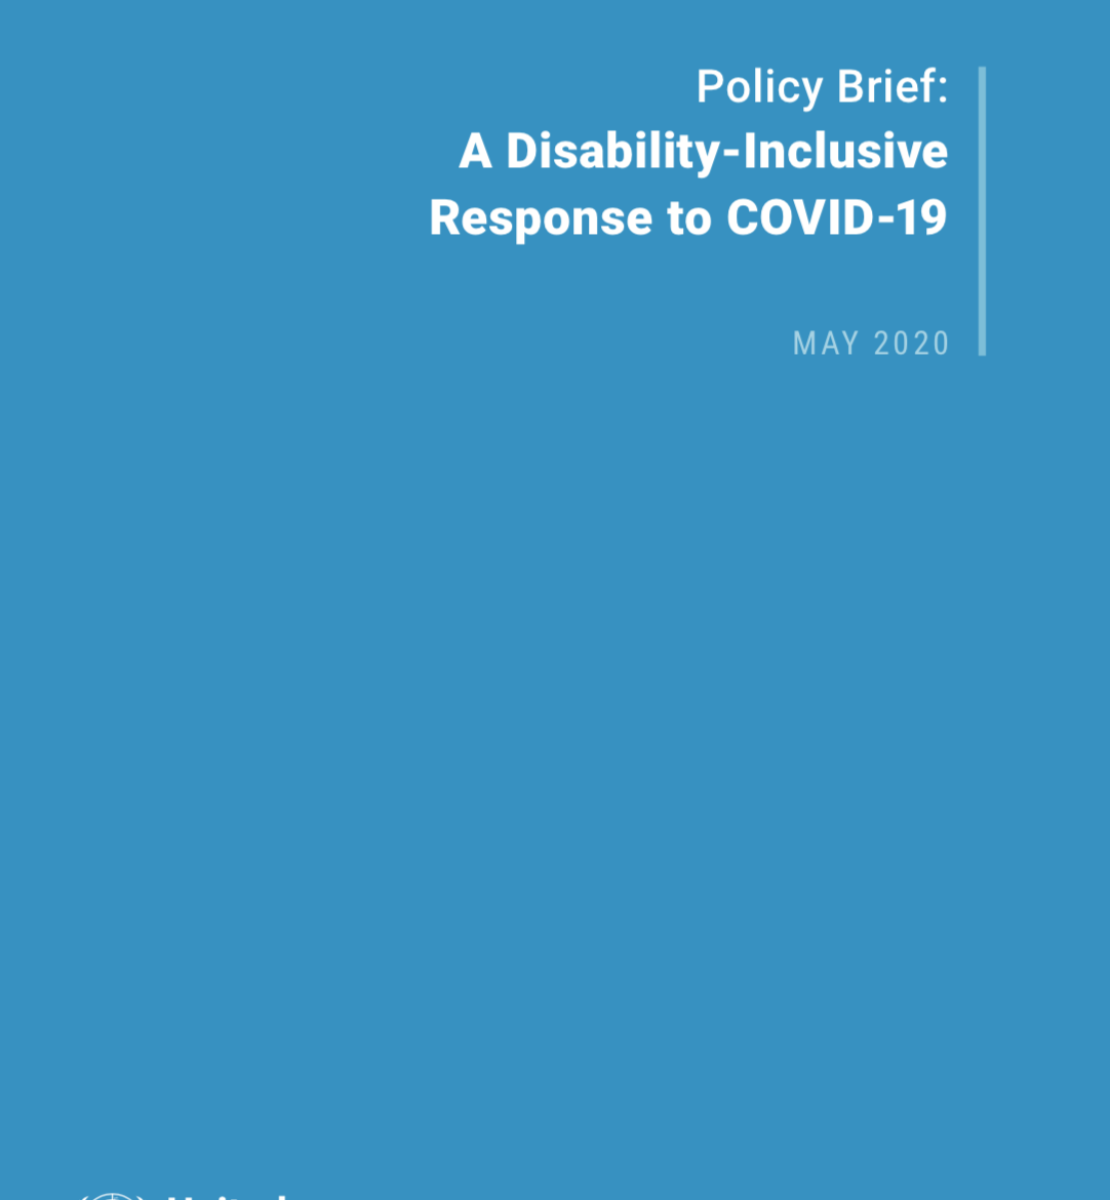 Cover shows the title "Policy Brief: A Disability-Inclusive Response to COVID-19" against a solid blue background with the UN emblem on the lower left side.